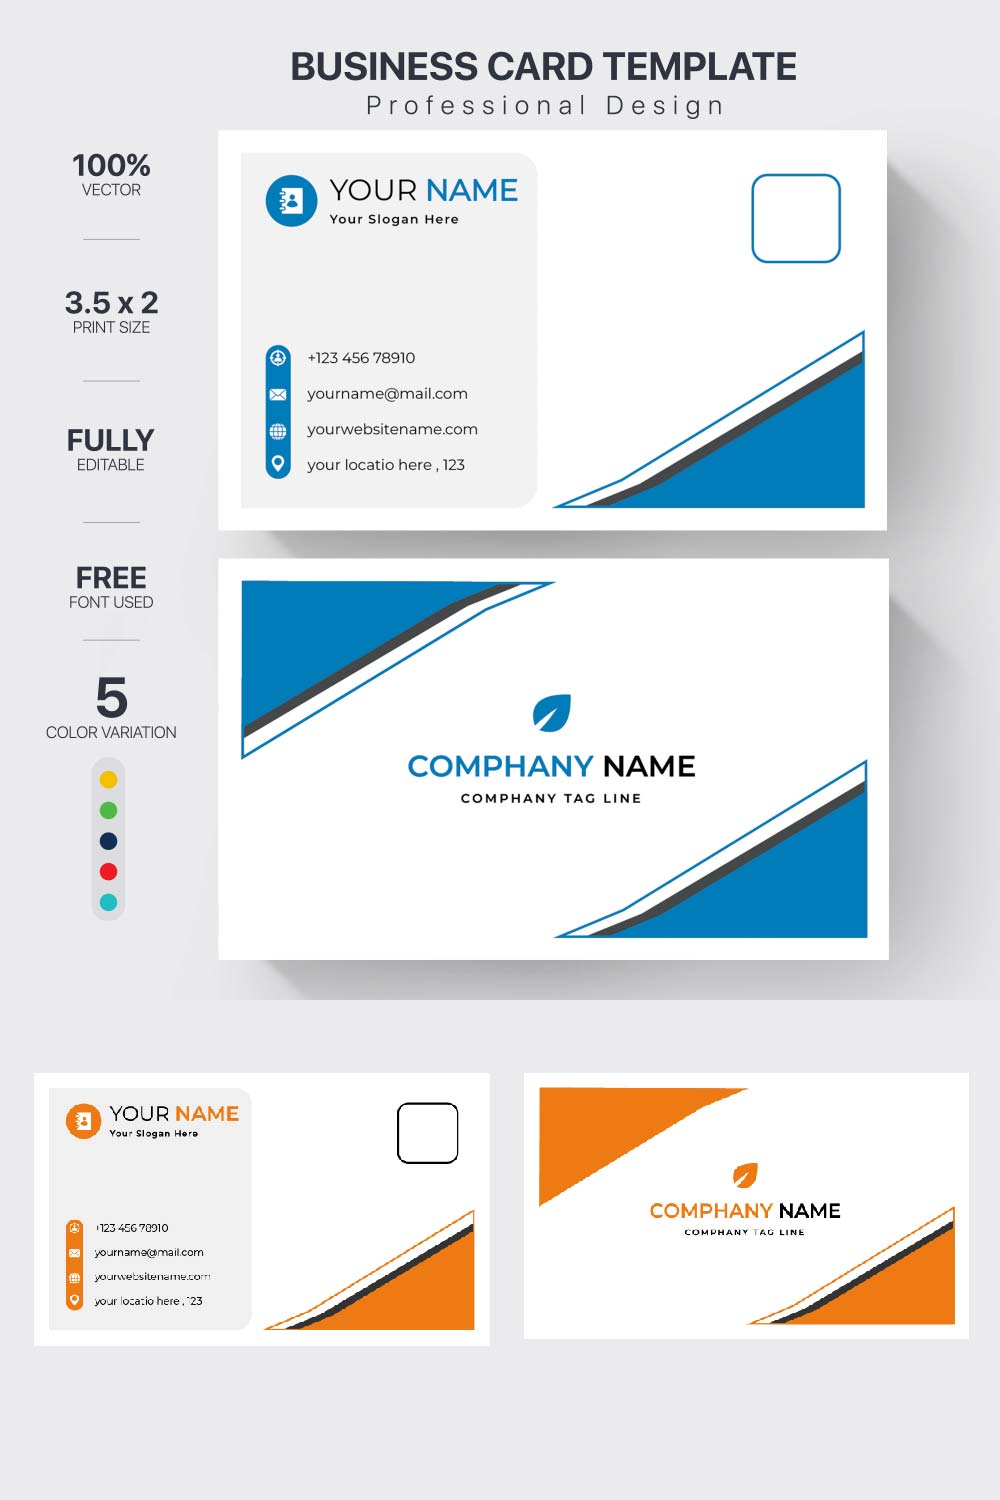 Gorgeous double sided business card template.